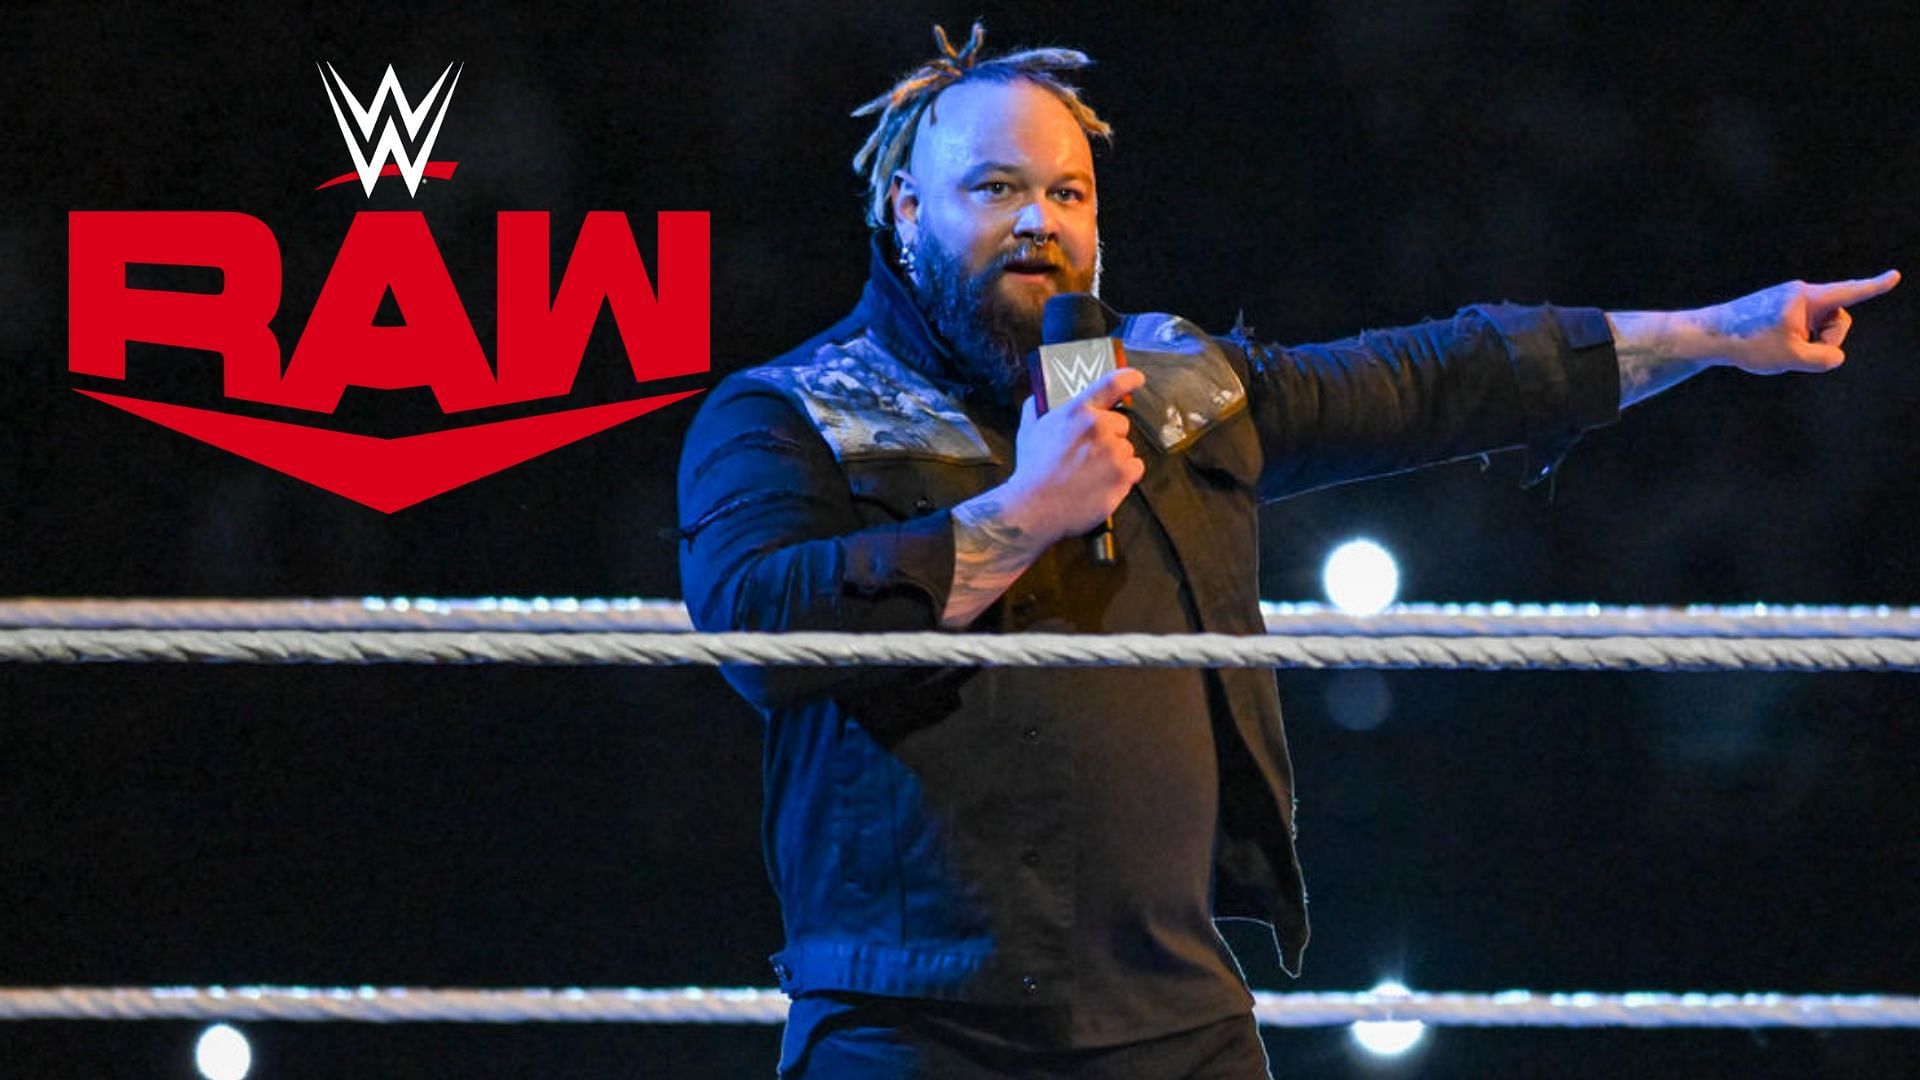 Bray Wyatt continues to tease the WWE Universe.